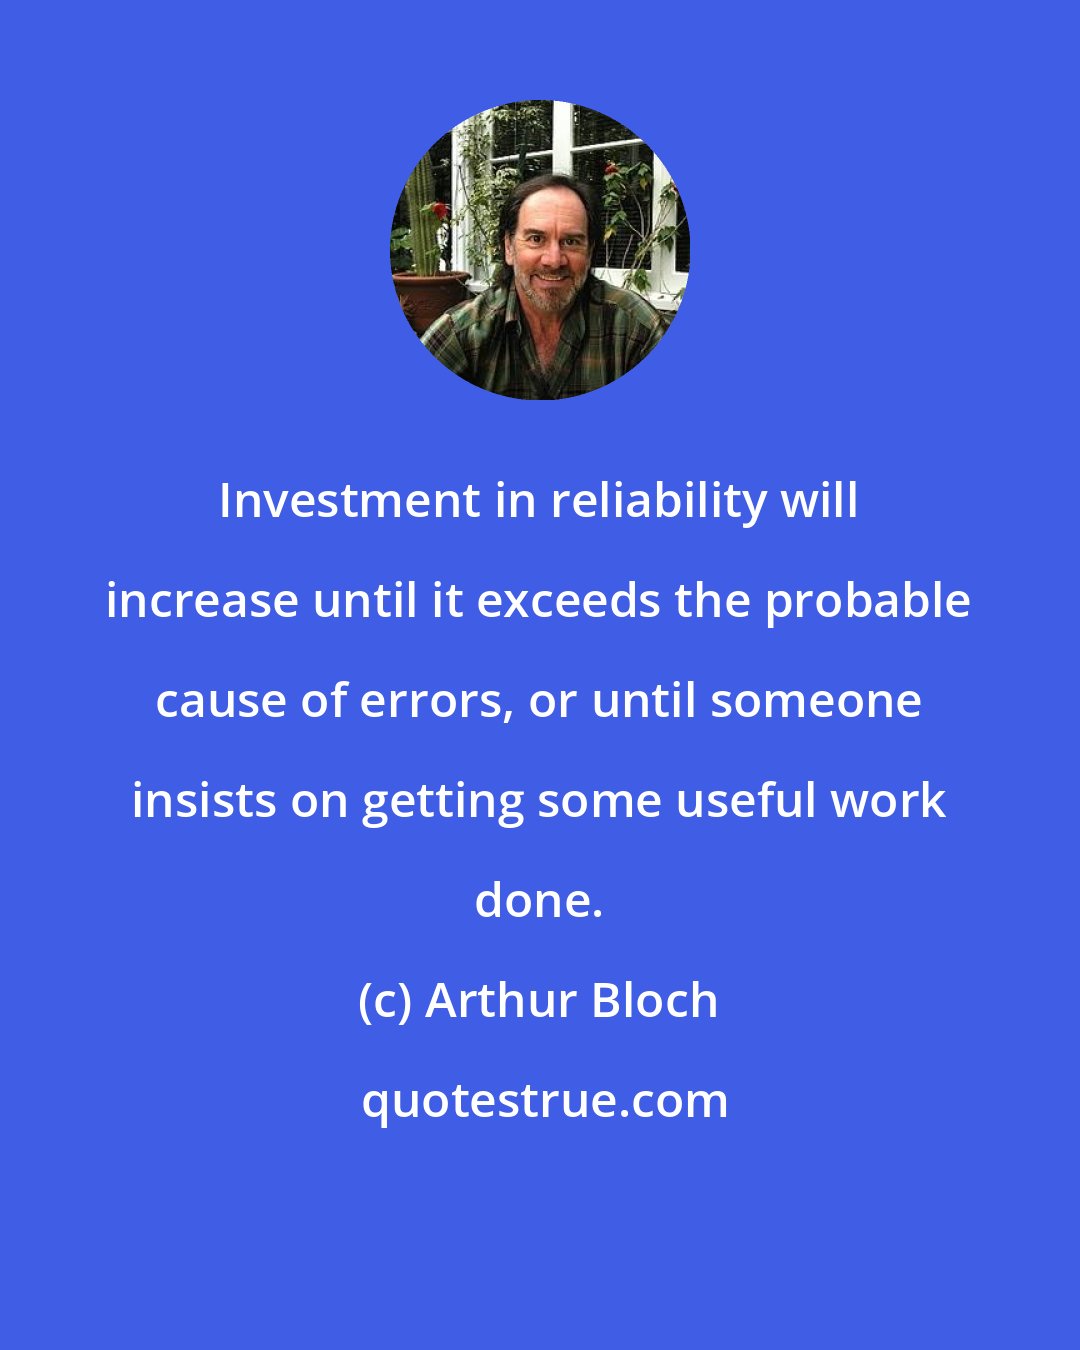 Arthur Bloch: Investment in reliability will increase until it exceeds the probable cause of errors, or until someone insists on getting some useful work done.